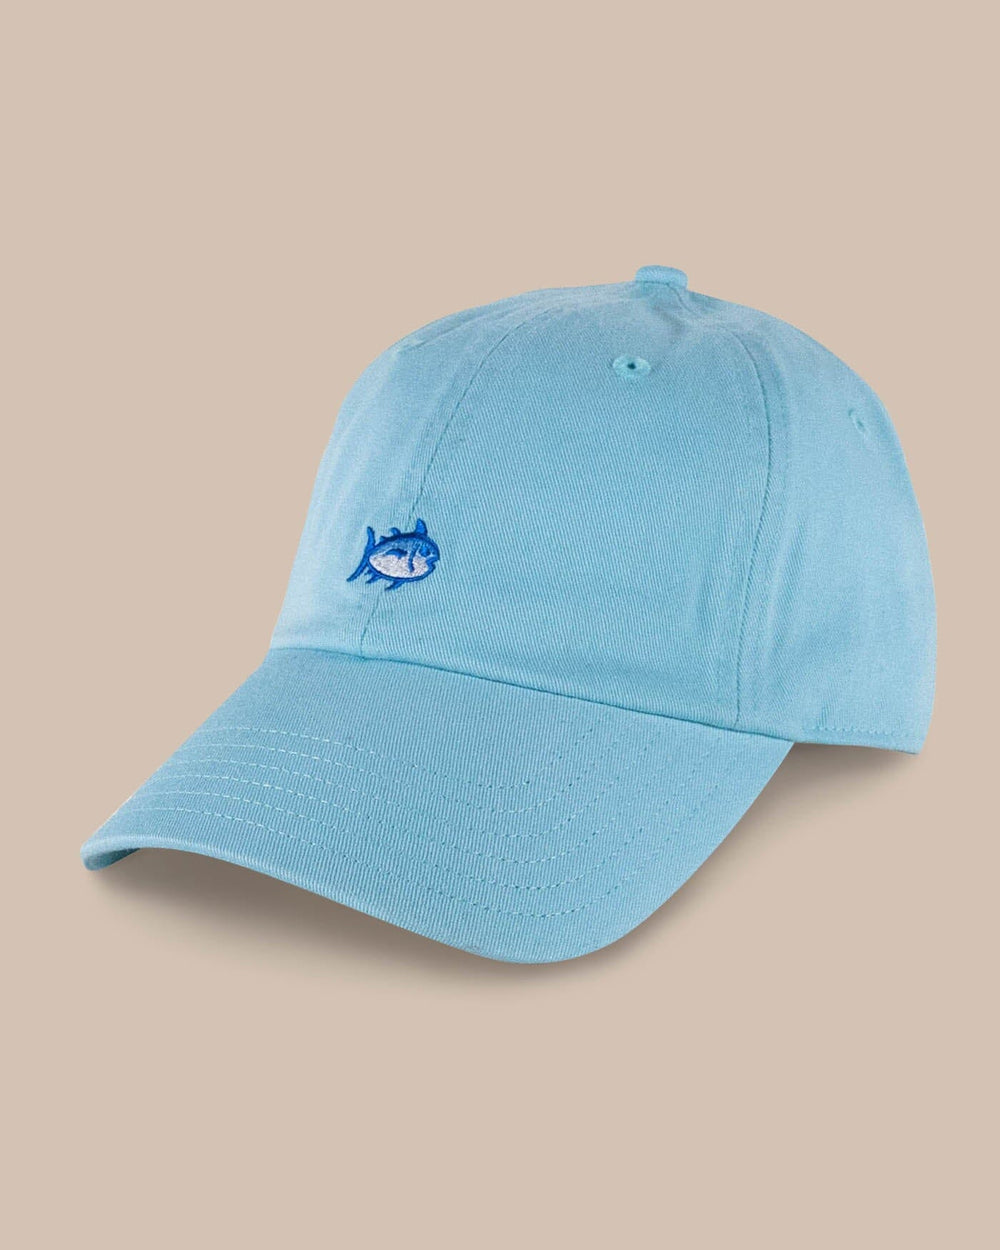 The front view of the Southern Tide Mini Skipjack Leather Strap Hat by Southern Tide - Aquamarine